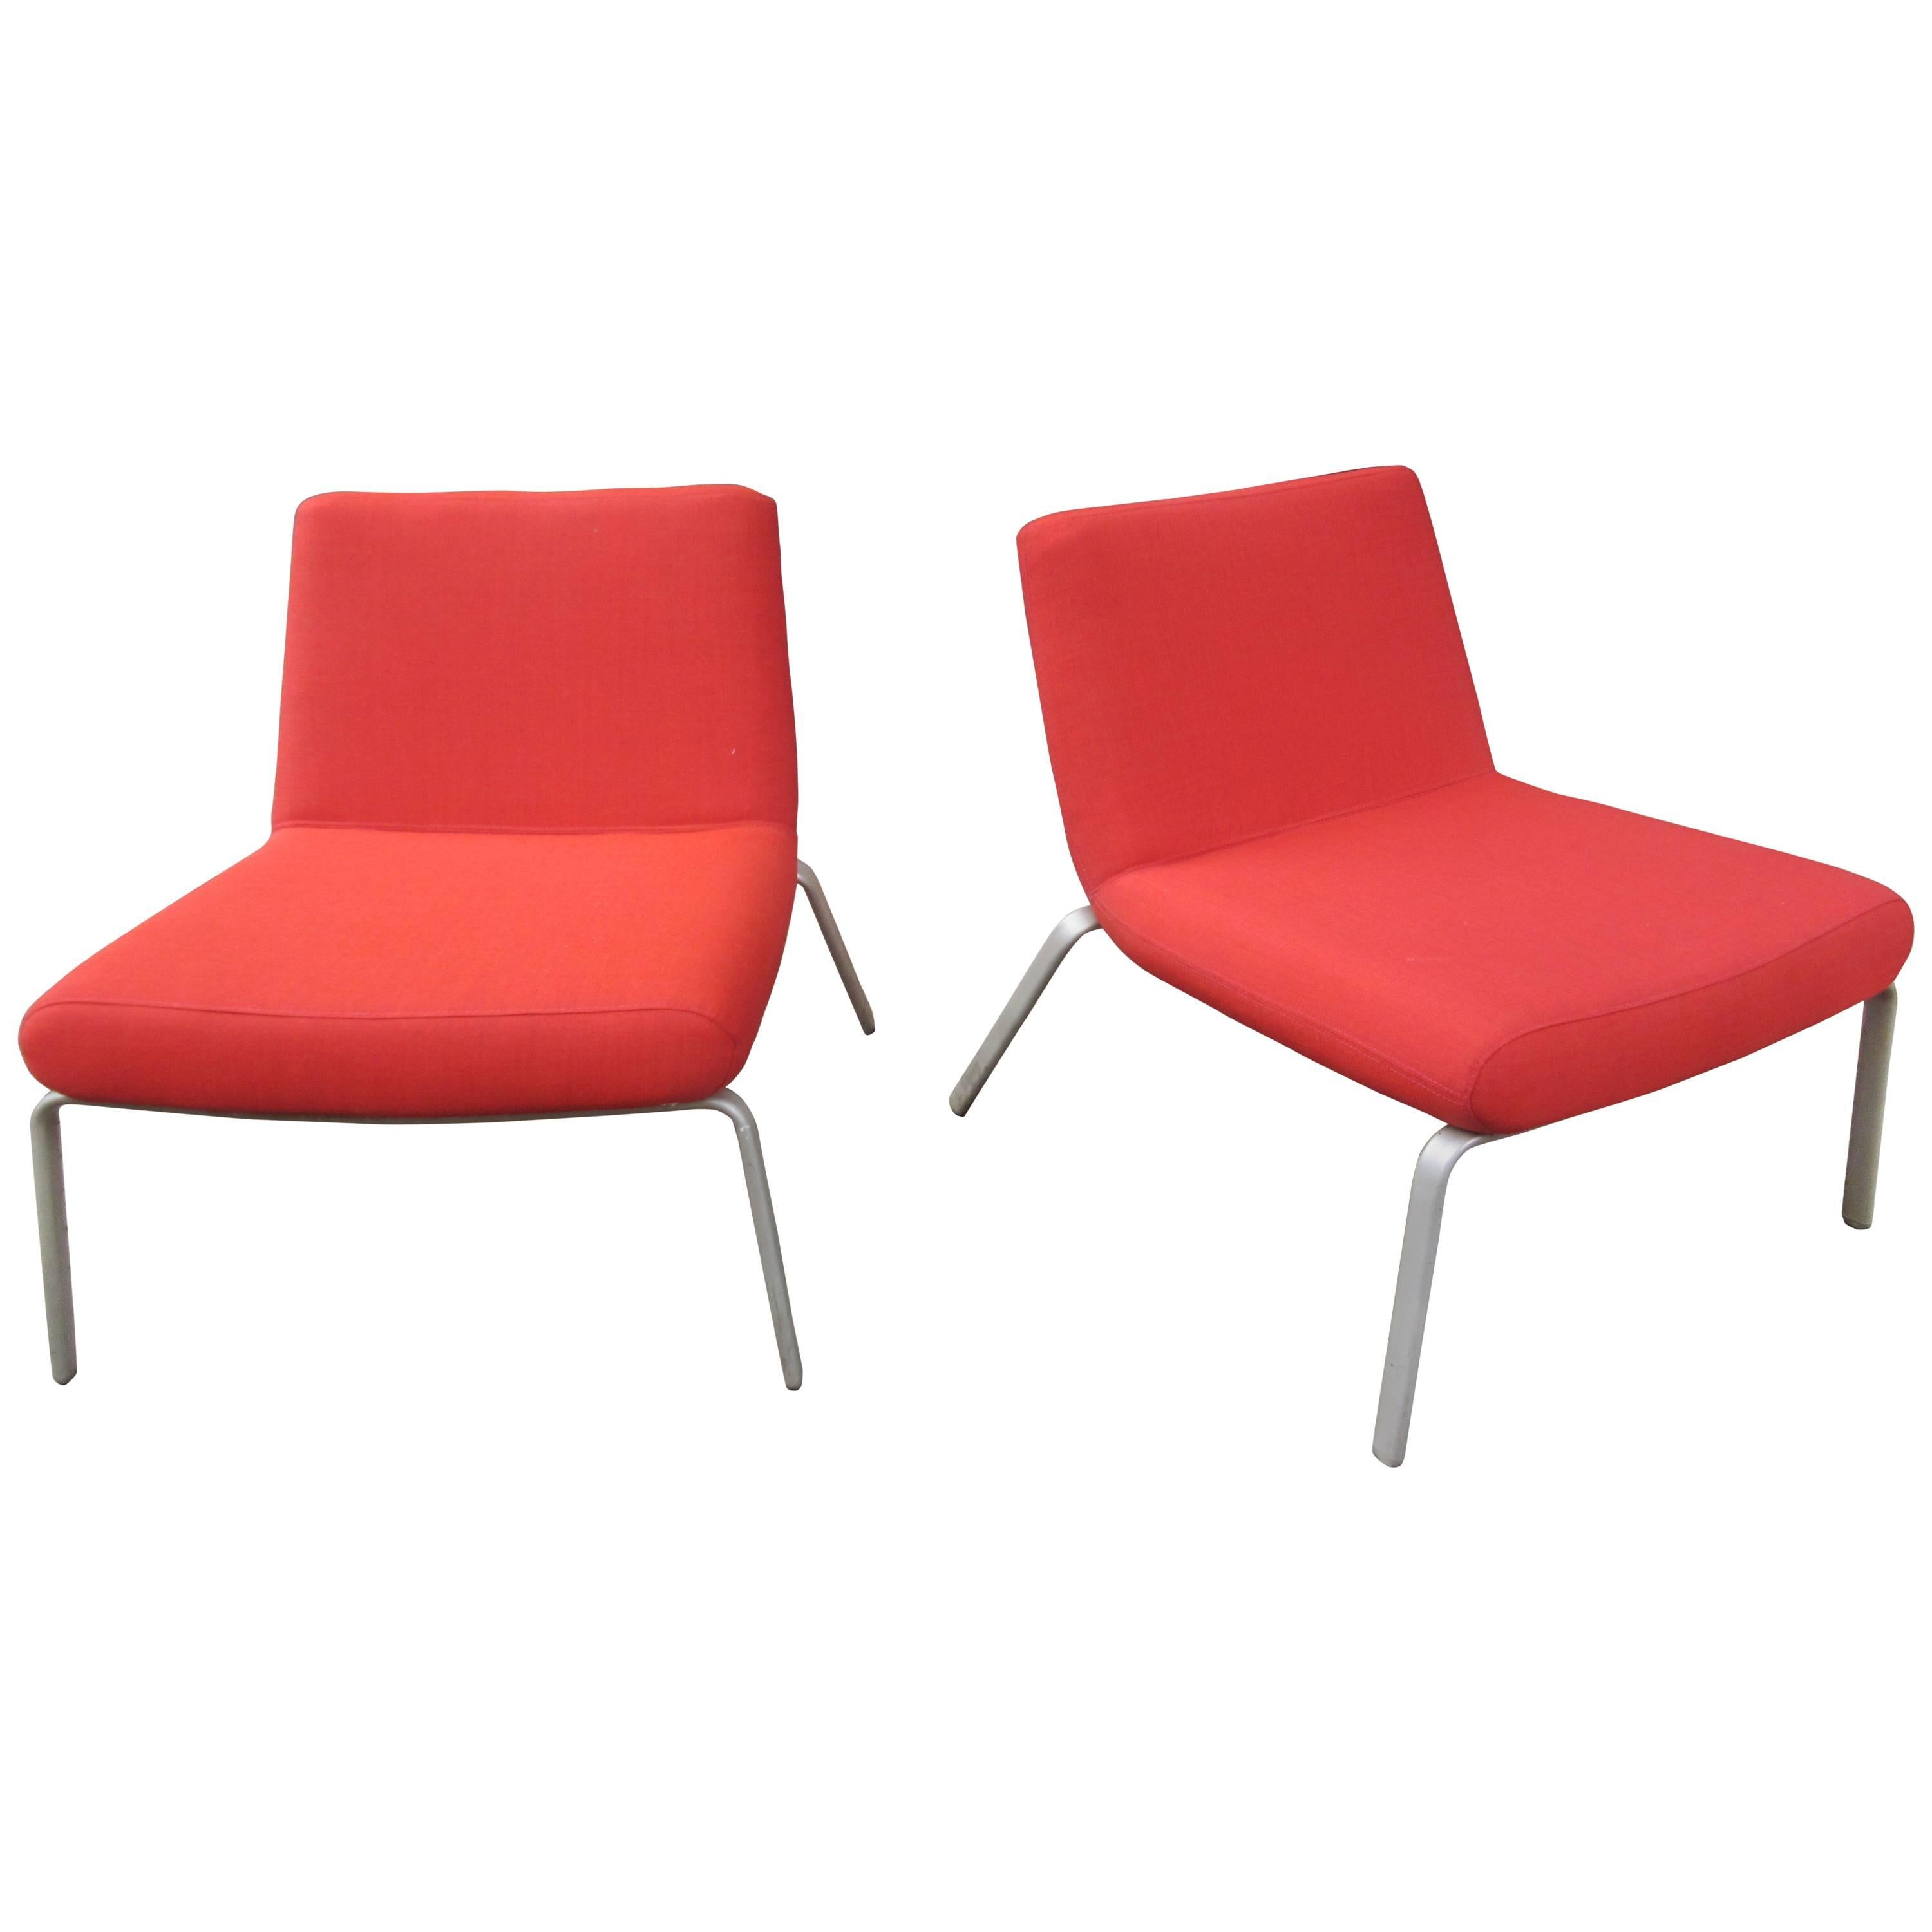 Pair of Mark Kapka Celia Chairs by Keilhauer Furniture at 1stDibs |  keilhauer celia chair, mike kapka, марк капка